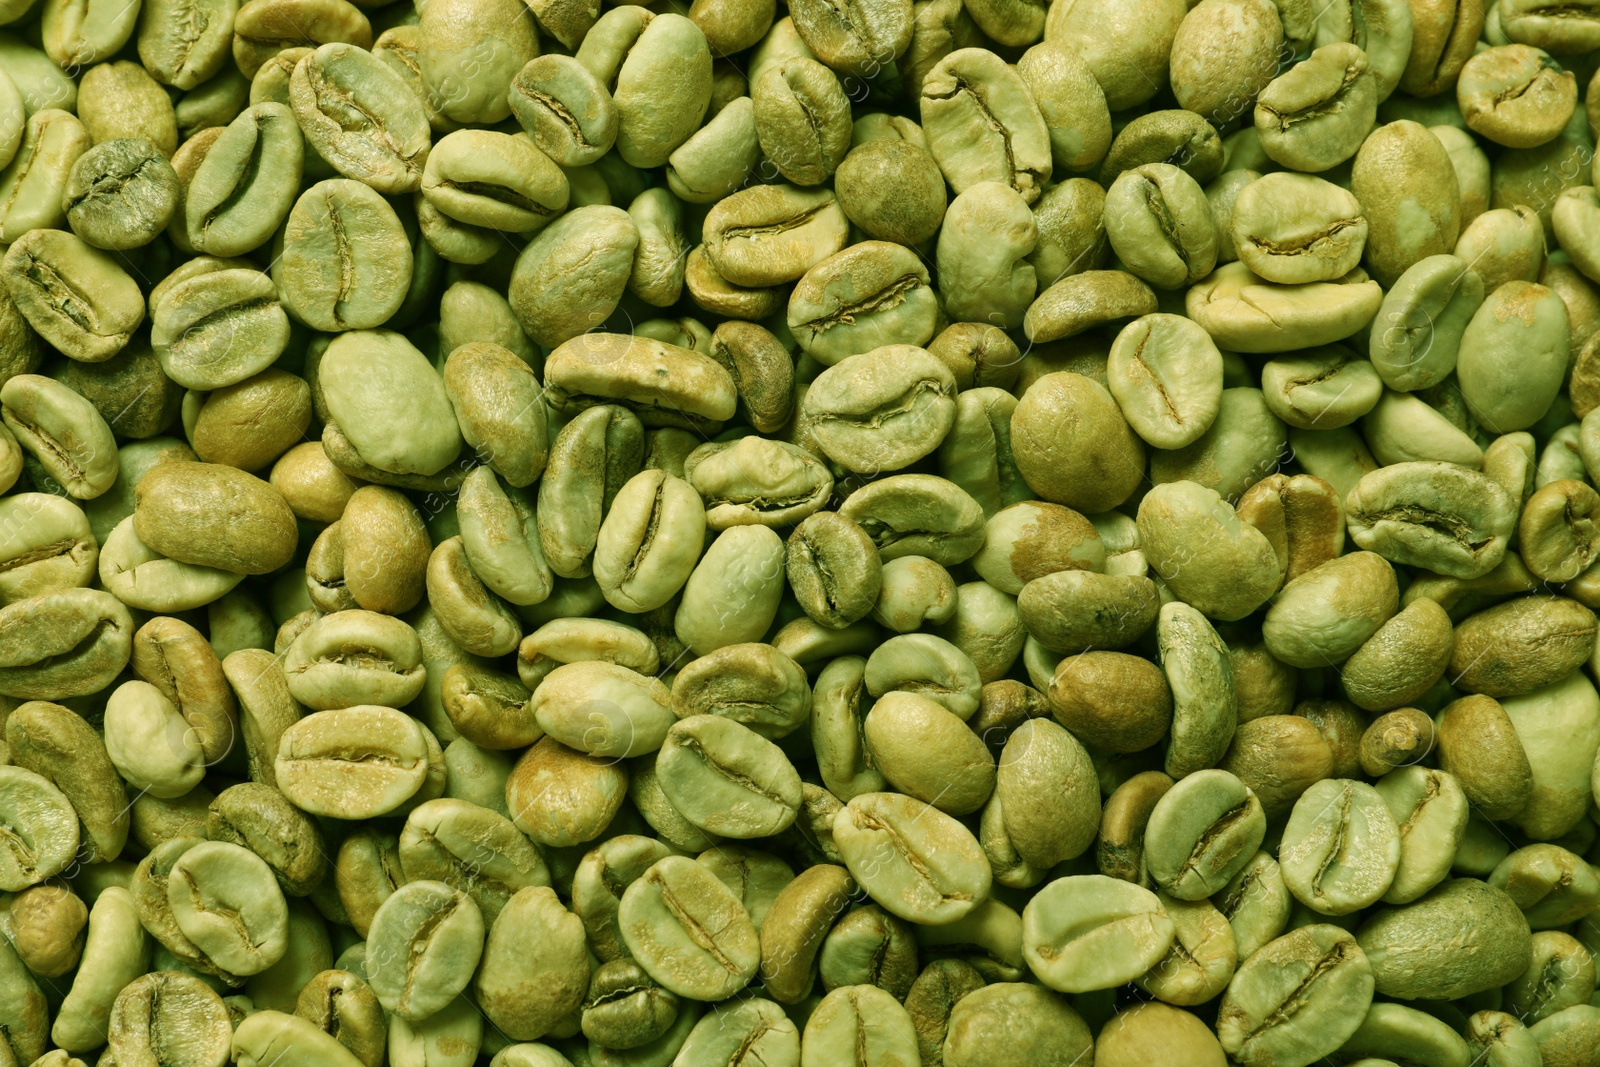 Photo of Many green coffee beans as background, top view